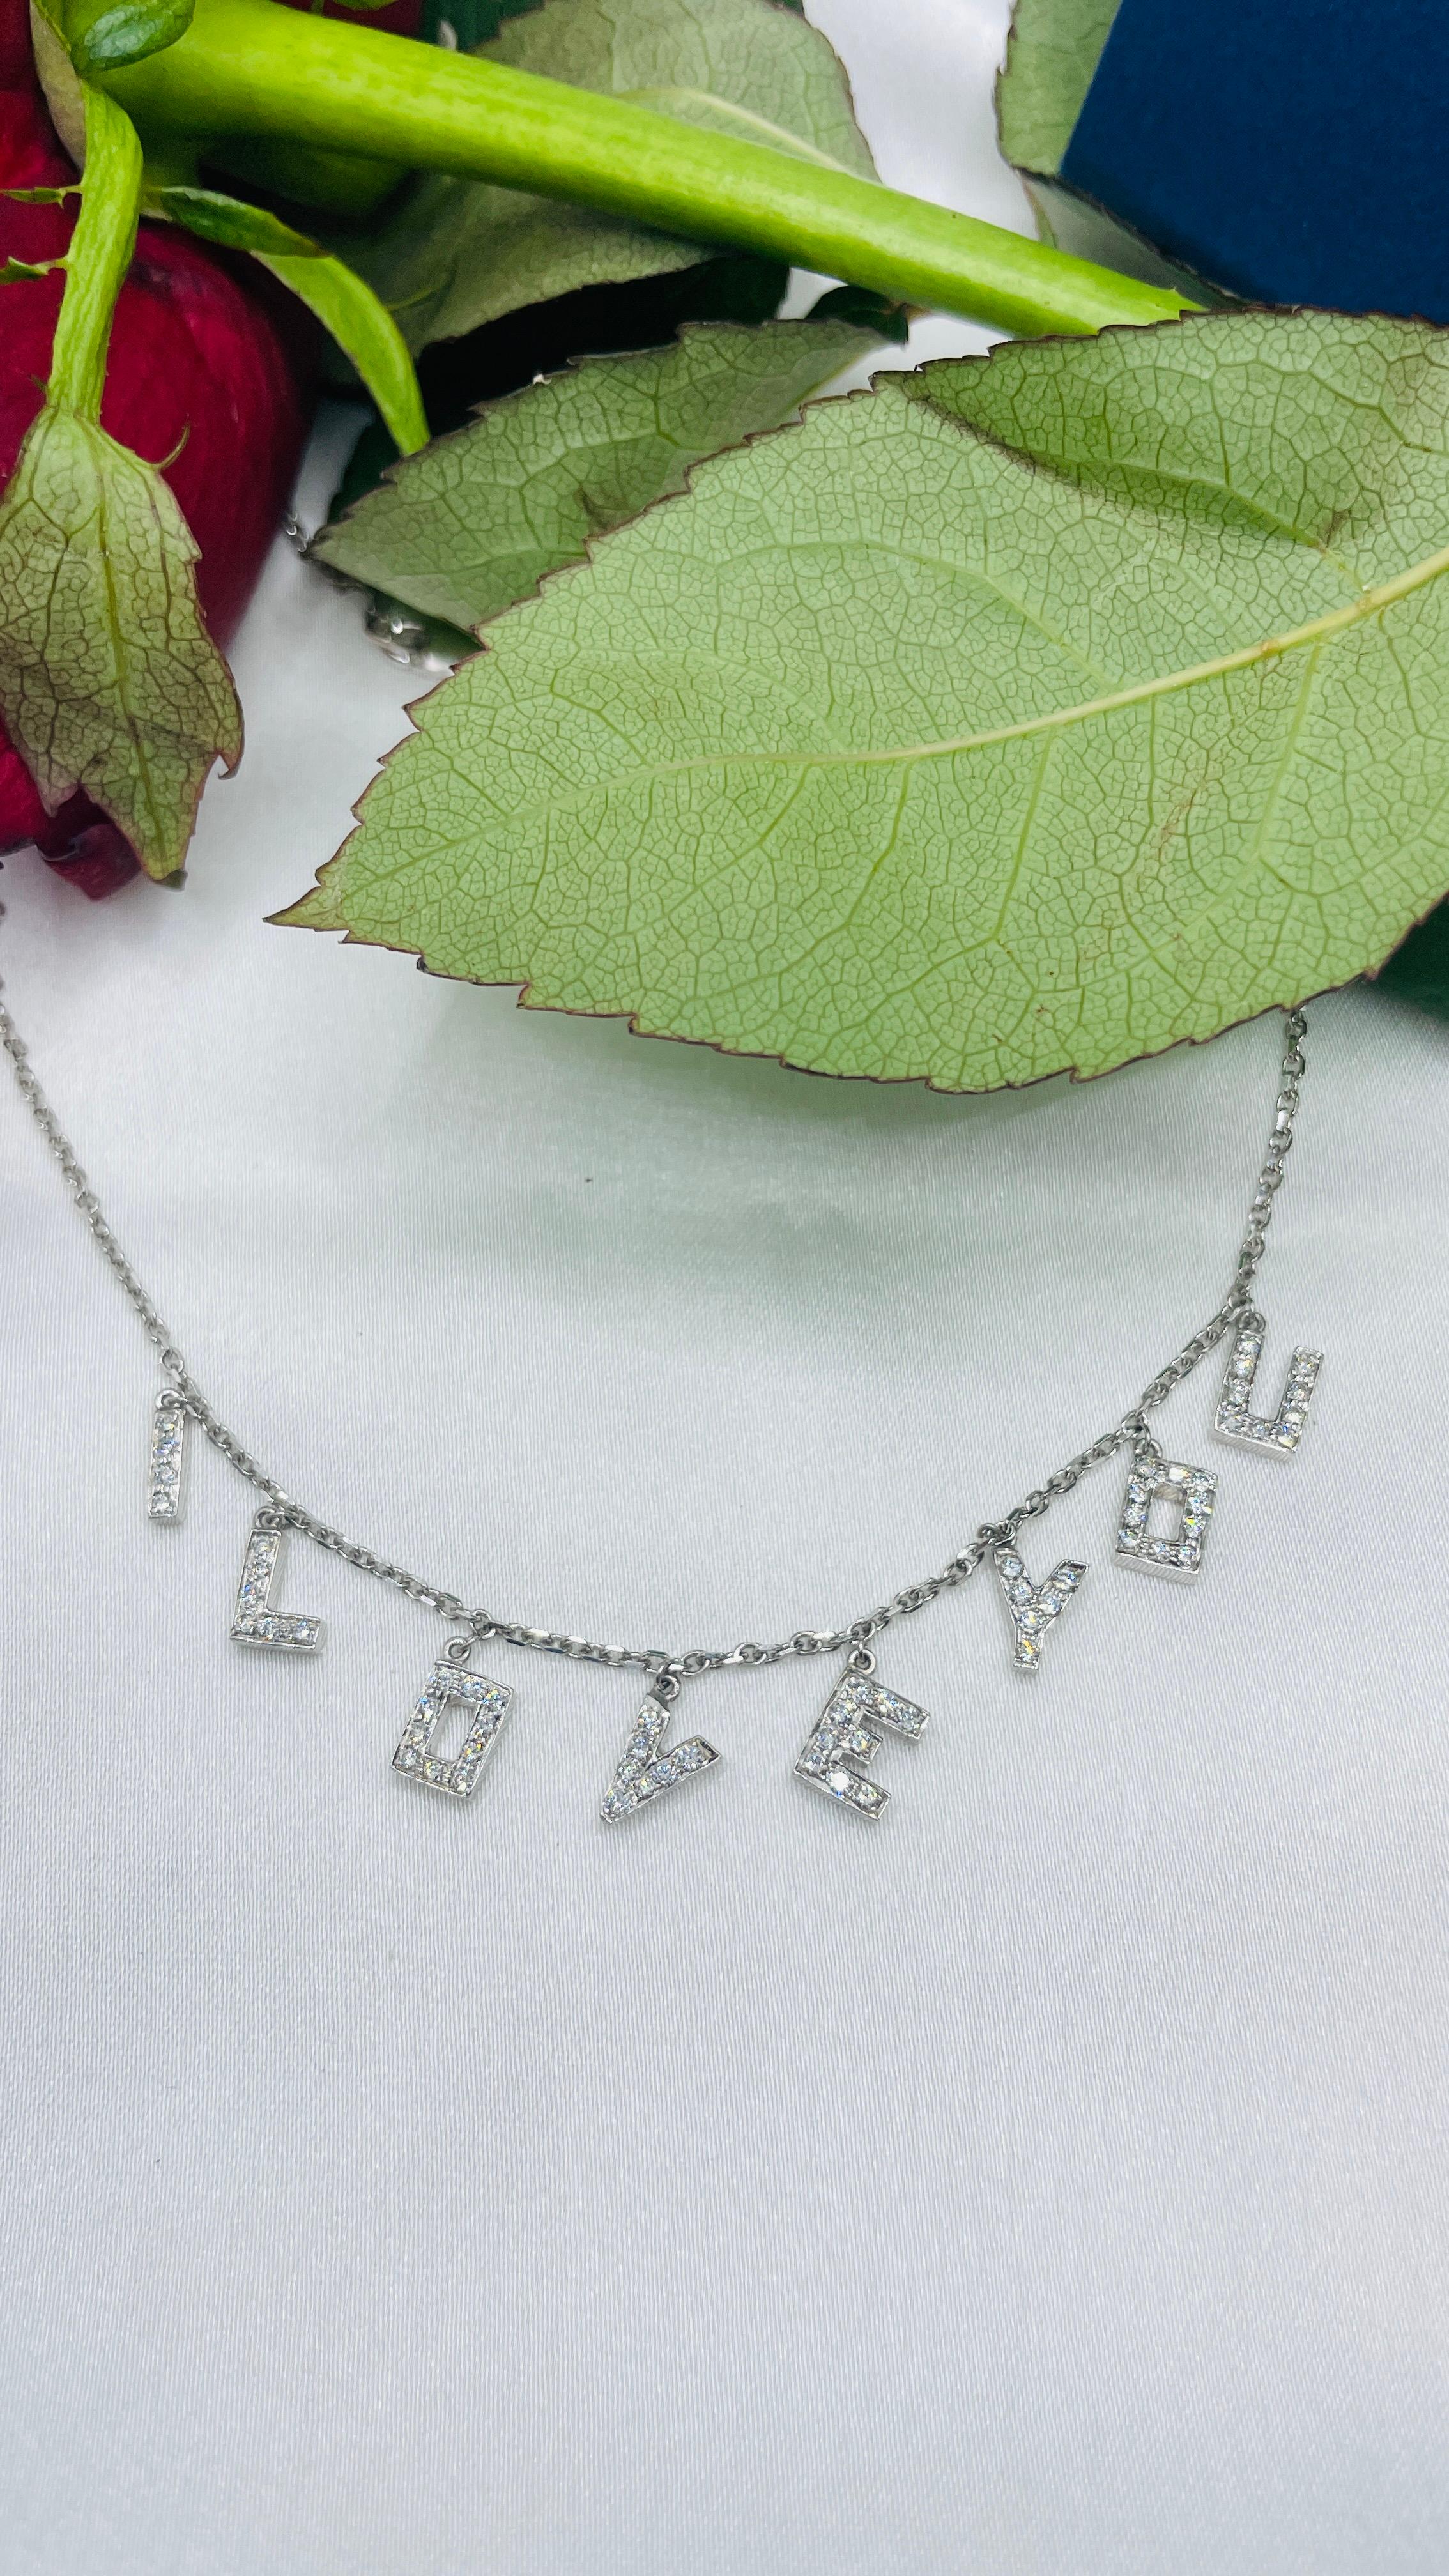 I Love You Diamond Necklace in 14K Gold studded with round cut diamond. This stunning piece of jewelry instantly elevates a casual look or dressy outfit. 
April birthstone diamond brings love, fame, success and prosperity.
Designed with round cut